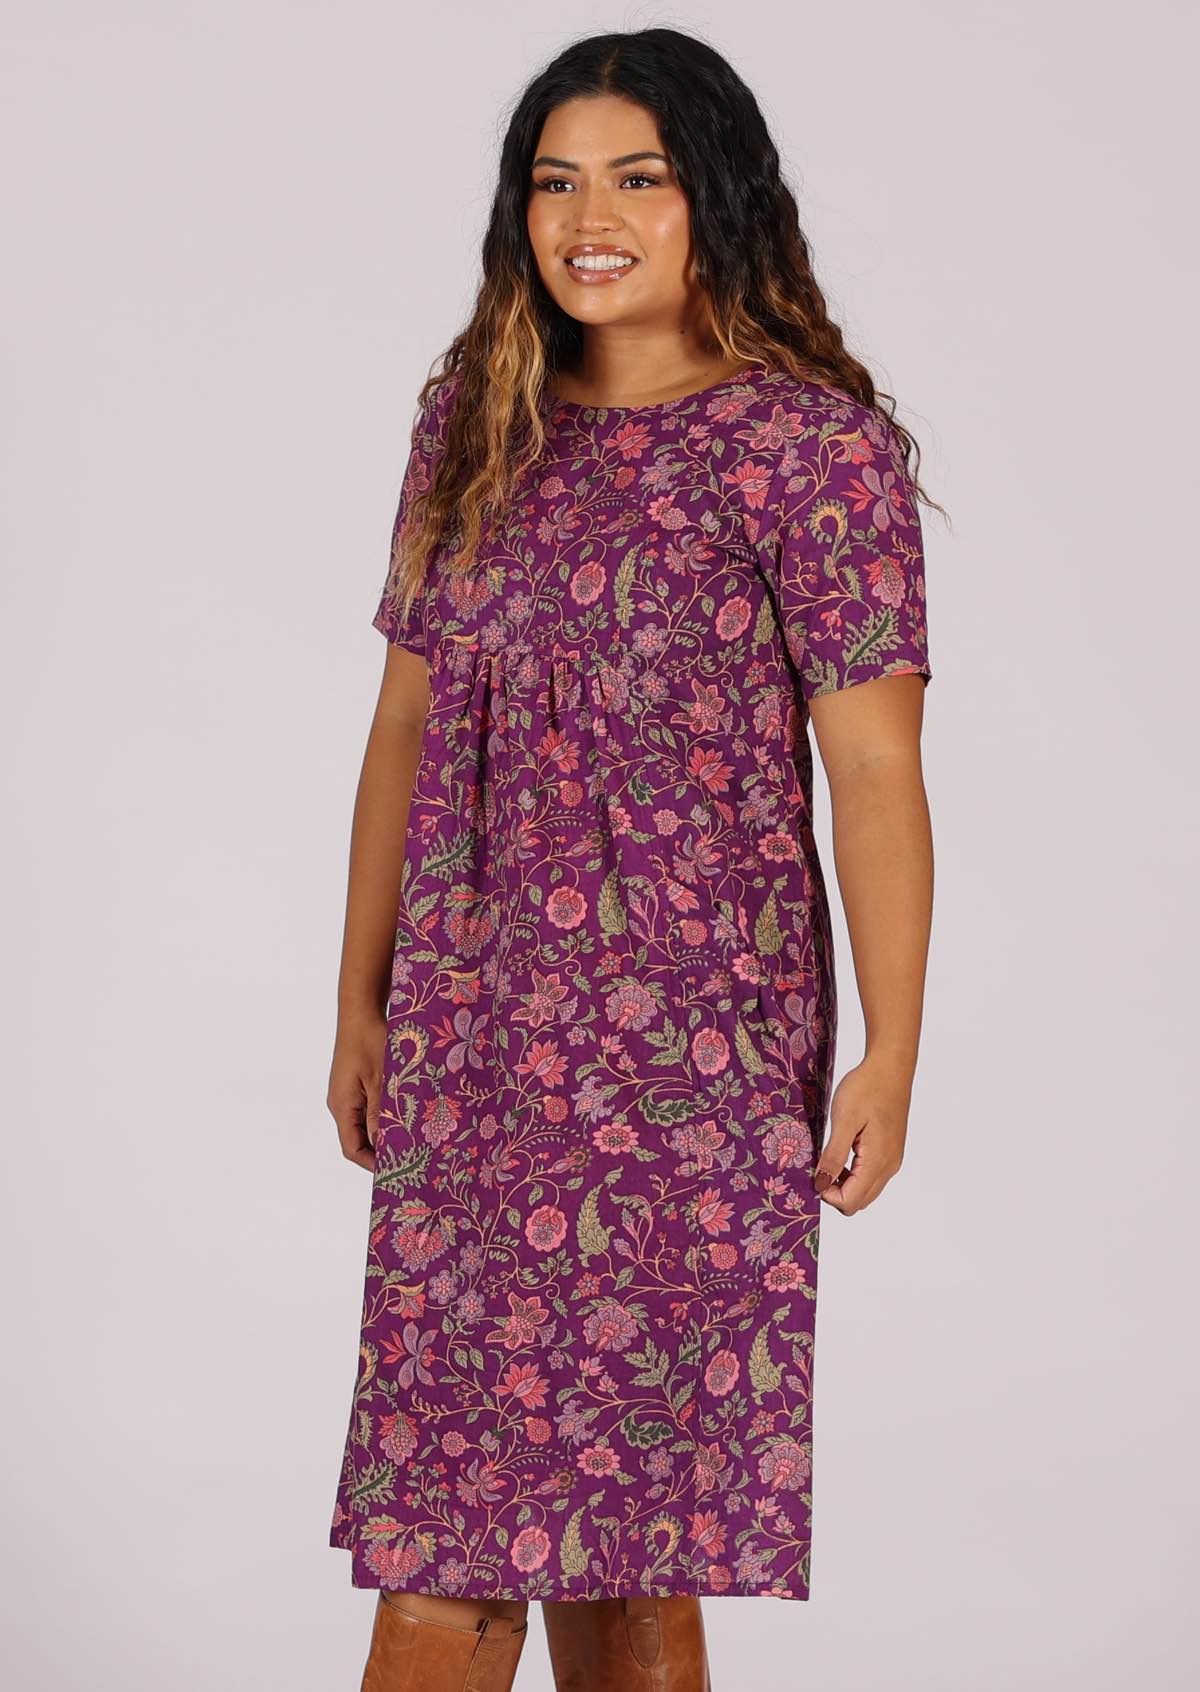 T-shirt sleeve cotton dress in sweet floral print on purple base